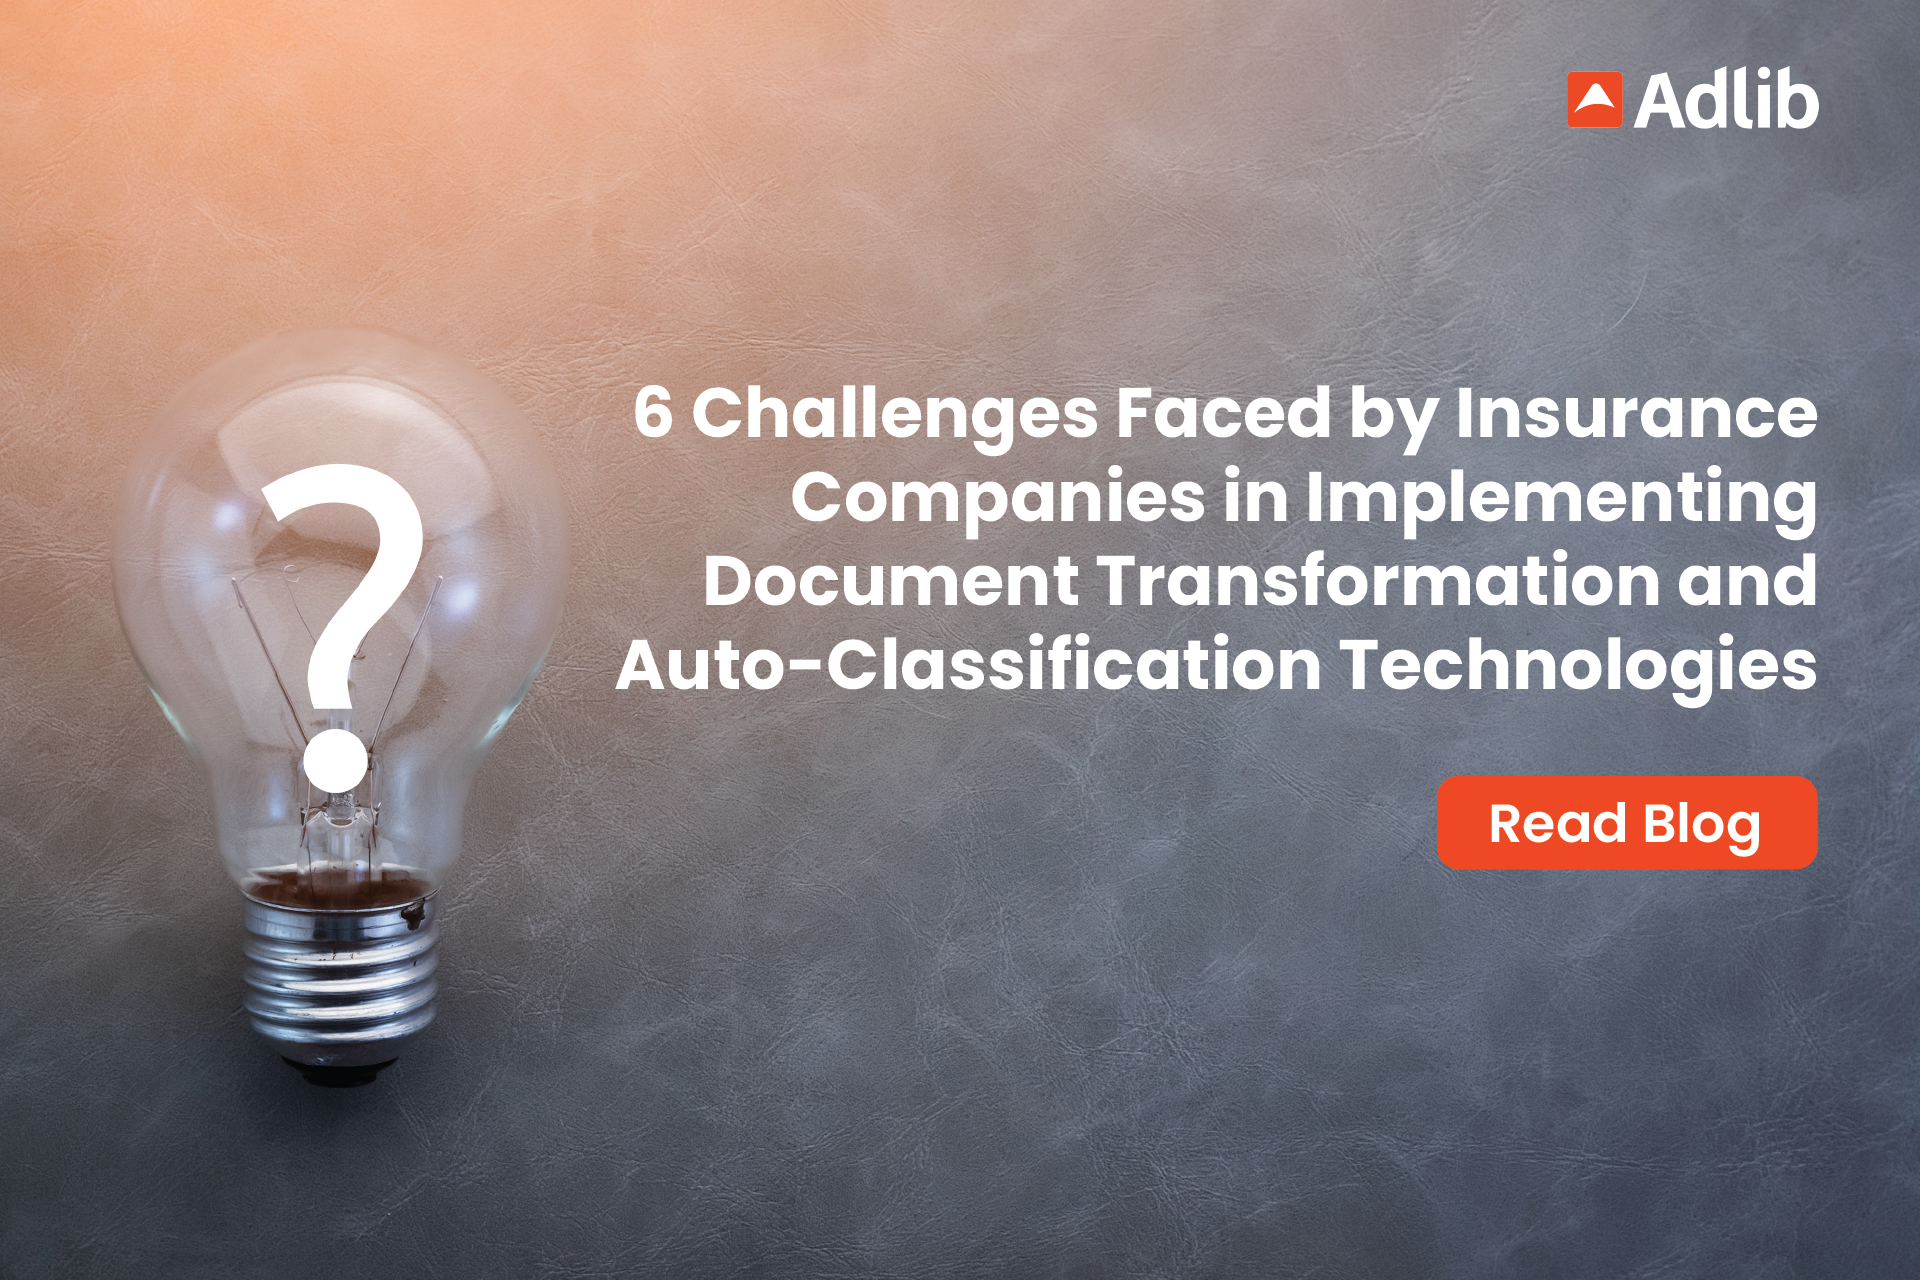 6 Challenges Faced by Insurance Companies in Implementing Document Transformation and Auto-Classification Technologies Featured Image